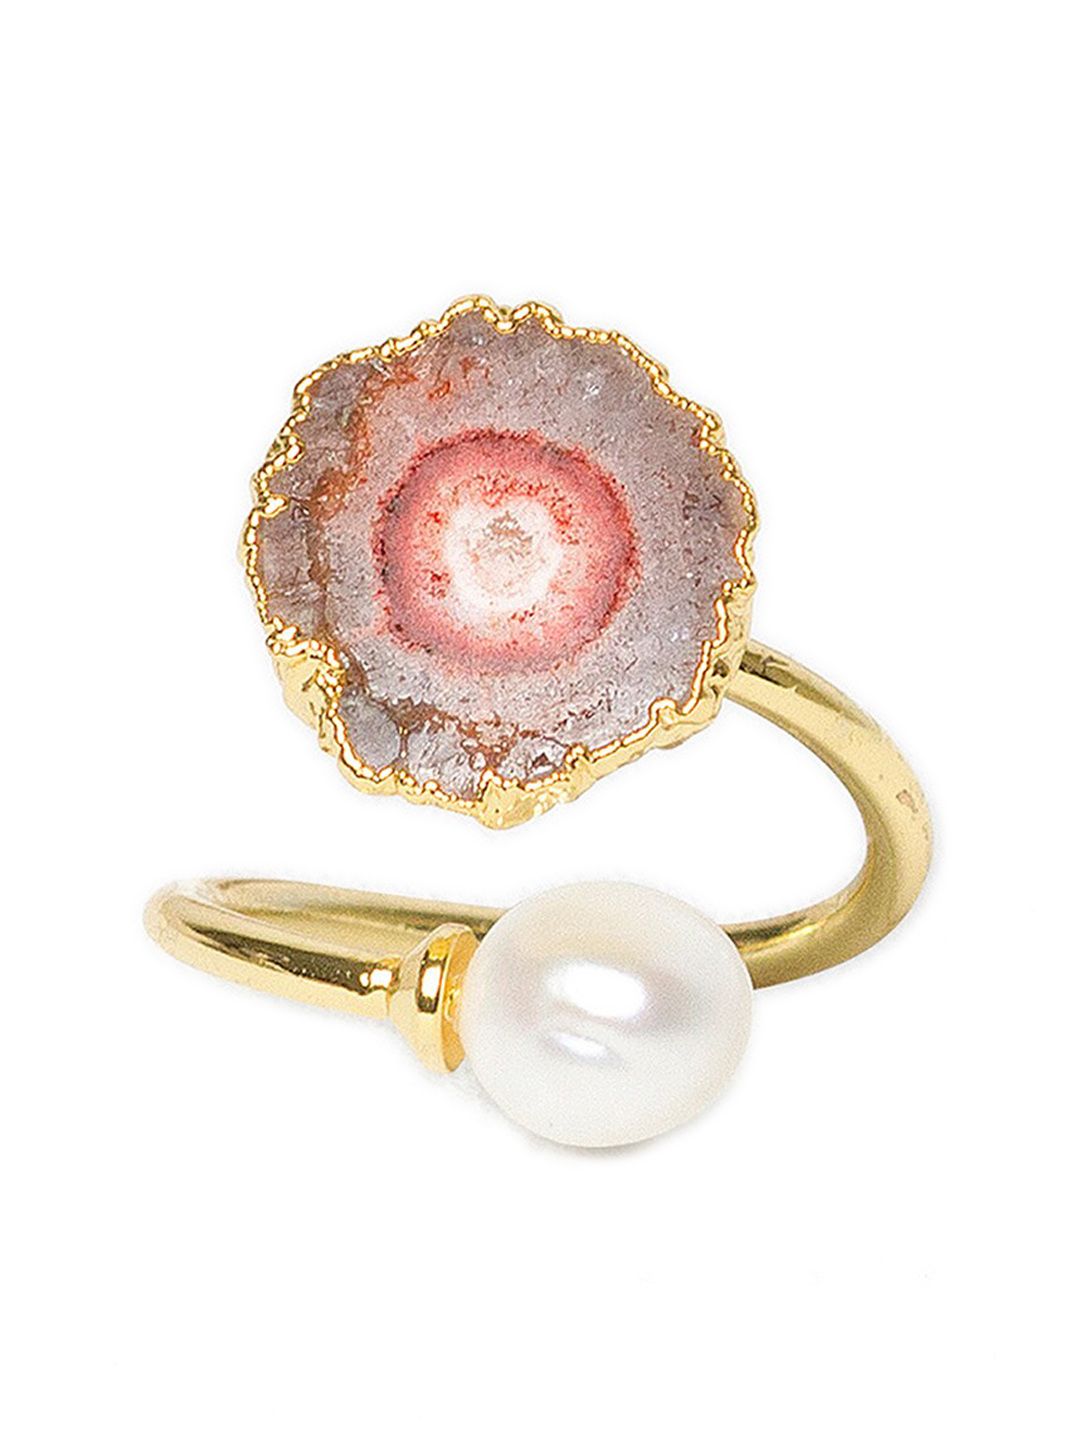 Mikoto by FableStreet 14KT Gold-Plated & White Pearl & Quartz-Studded Im-perfect Adjustable Finger Ring Price in India